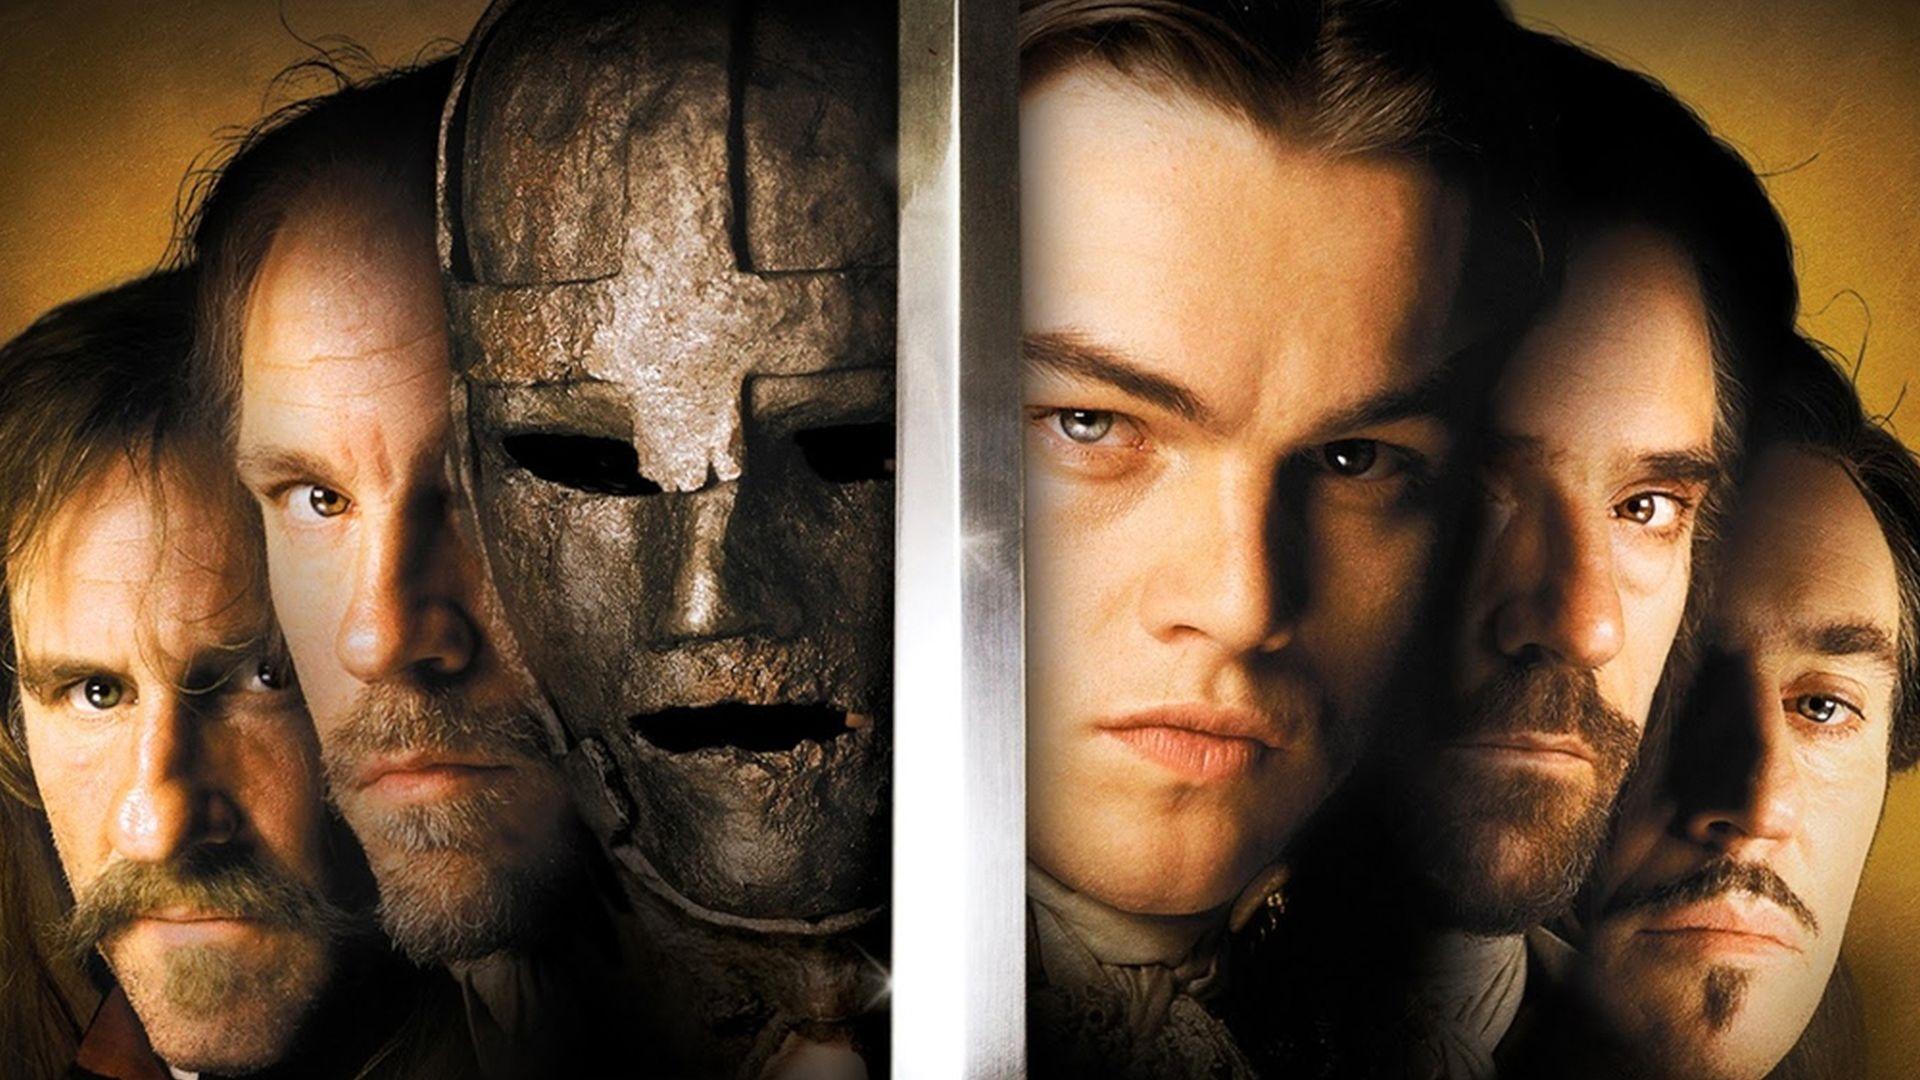 Download Movie The Man in the Iron Mask Leonardo Dicaprio Jeremy